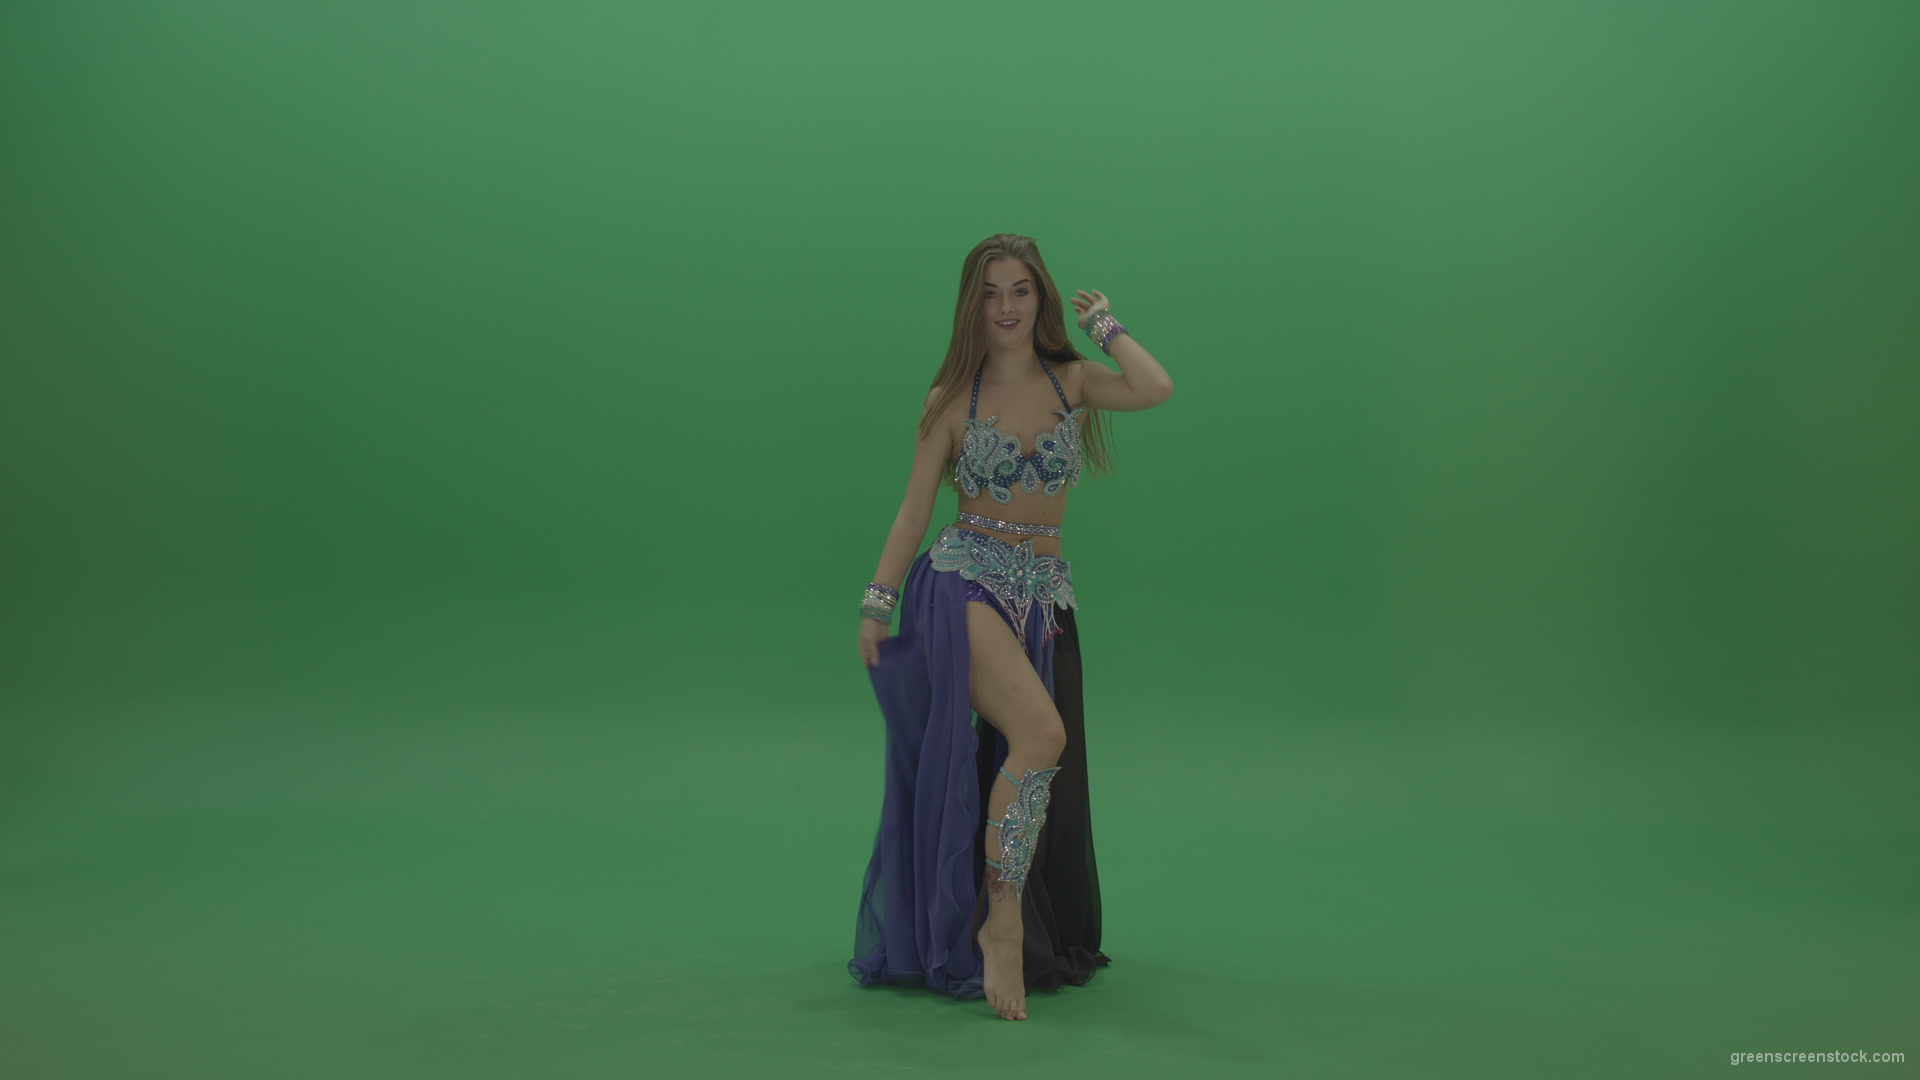 Splendid-belly-dancer-in-purple-and-black-wear-display-amazing-dance-moves-over-chromakey-background_005 Green Screen Stock